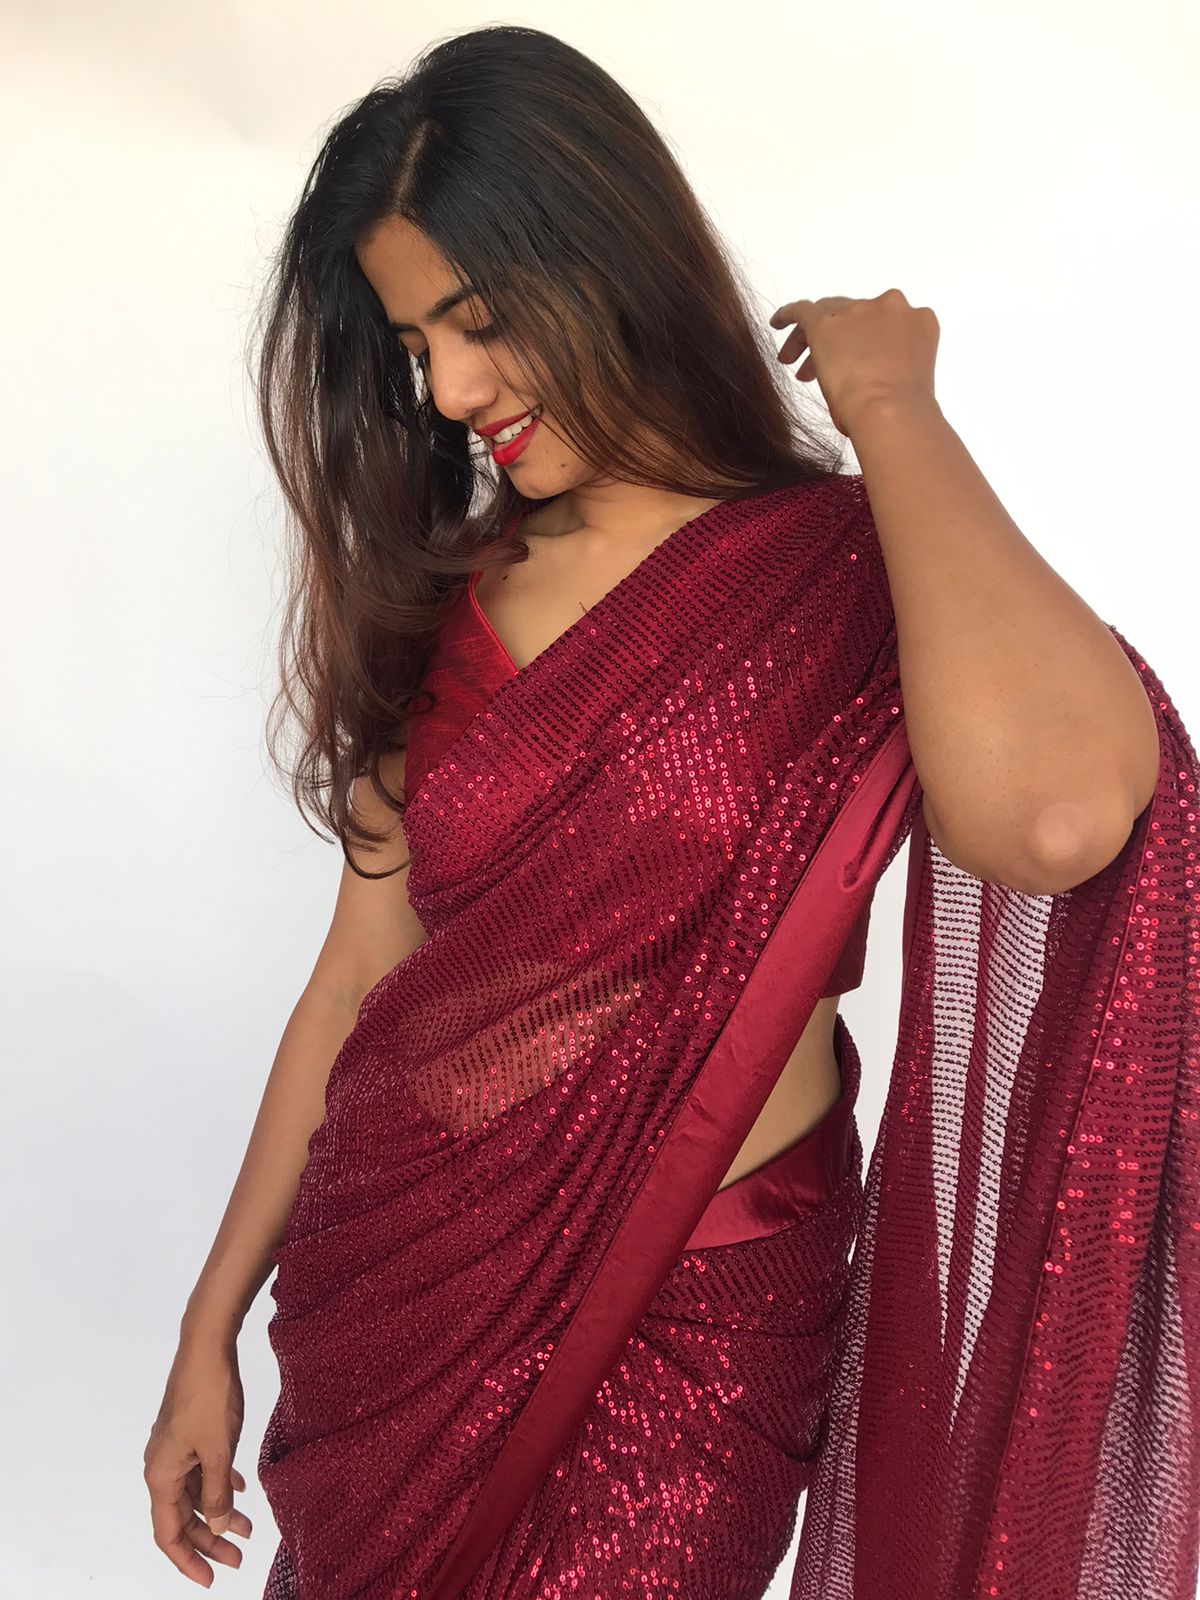 4 Secrets For Looking Slim In Saree Without Losing Any Weight